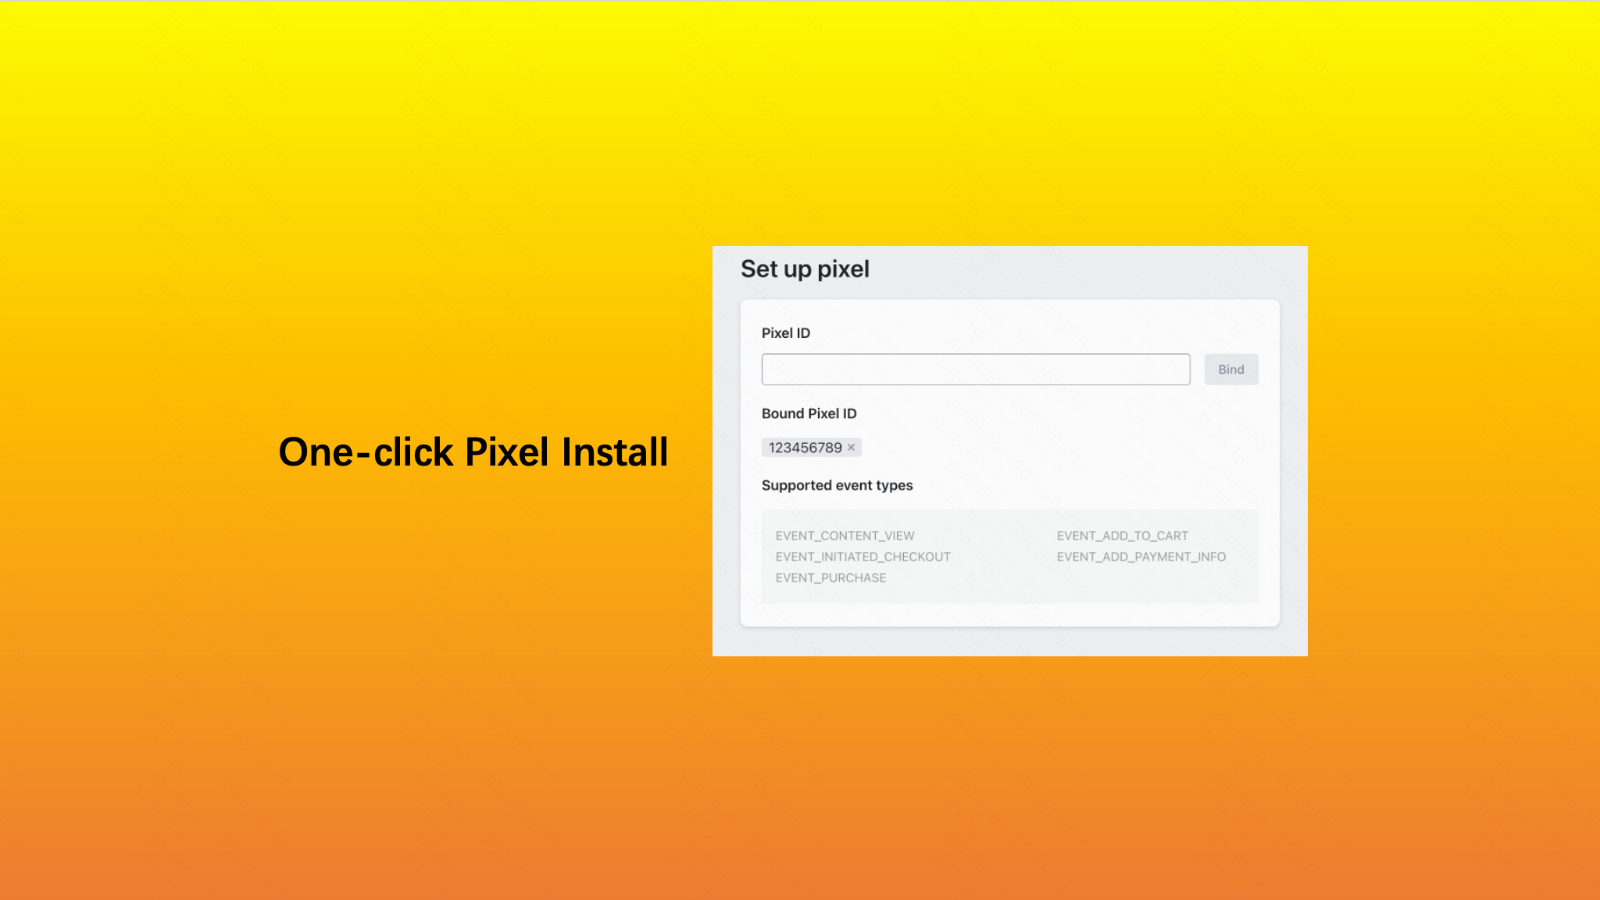 One-click Pixel Install